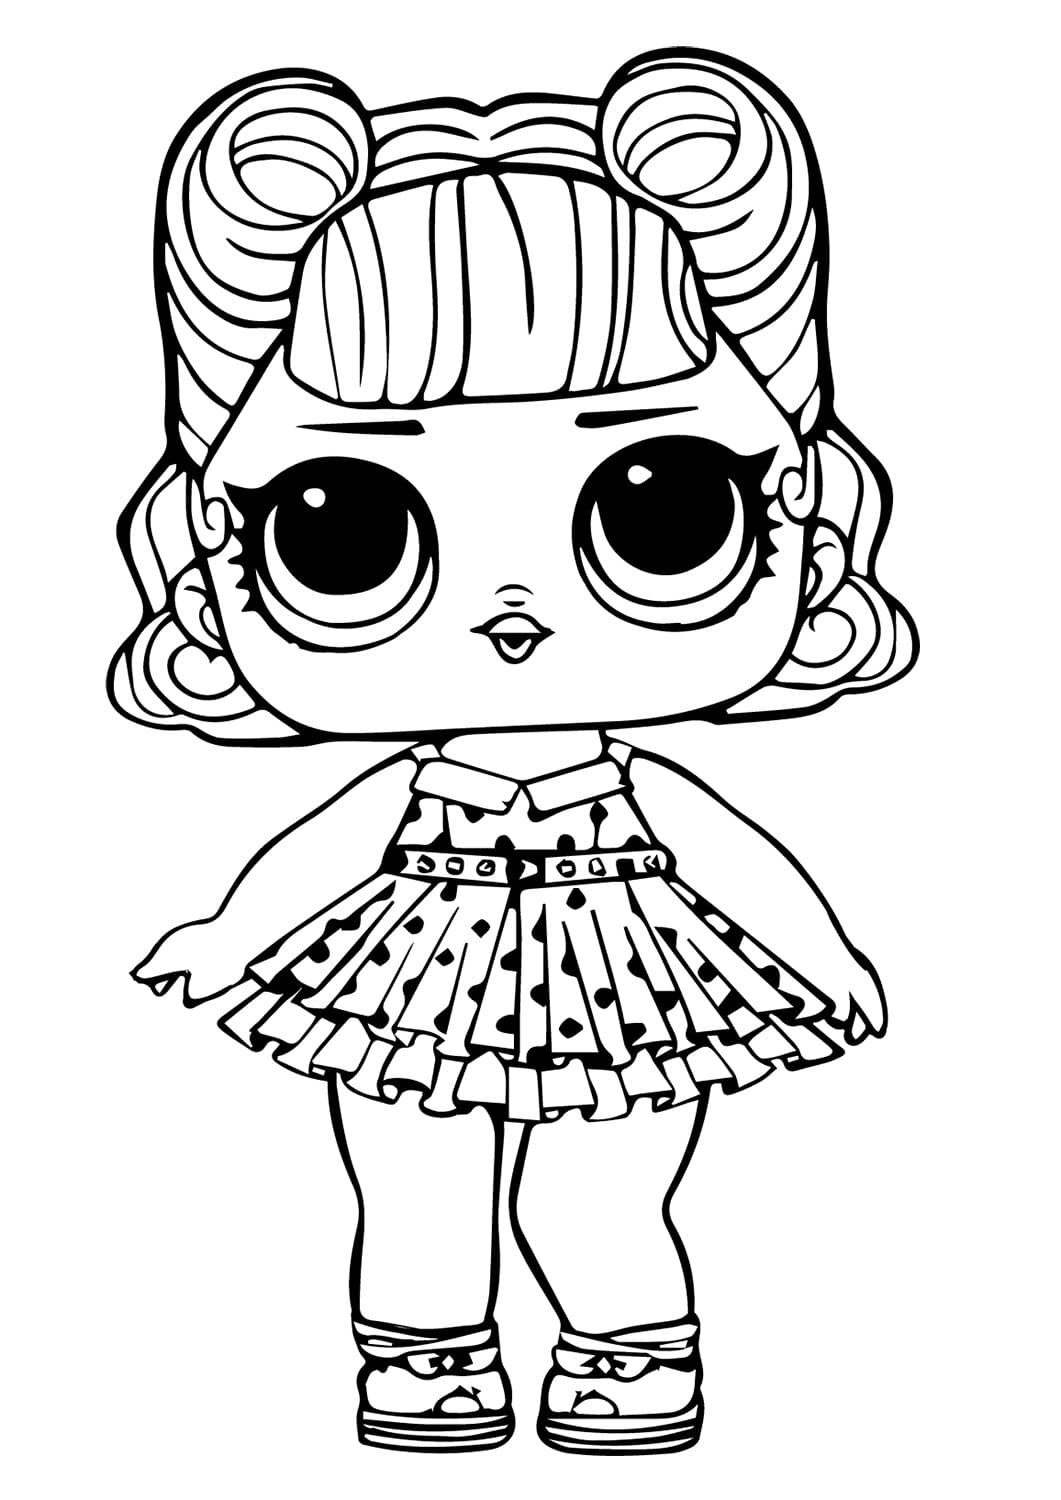 Lol Surprise Doll Coloring Pages   Coloring Pages For Kids And Adults